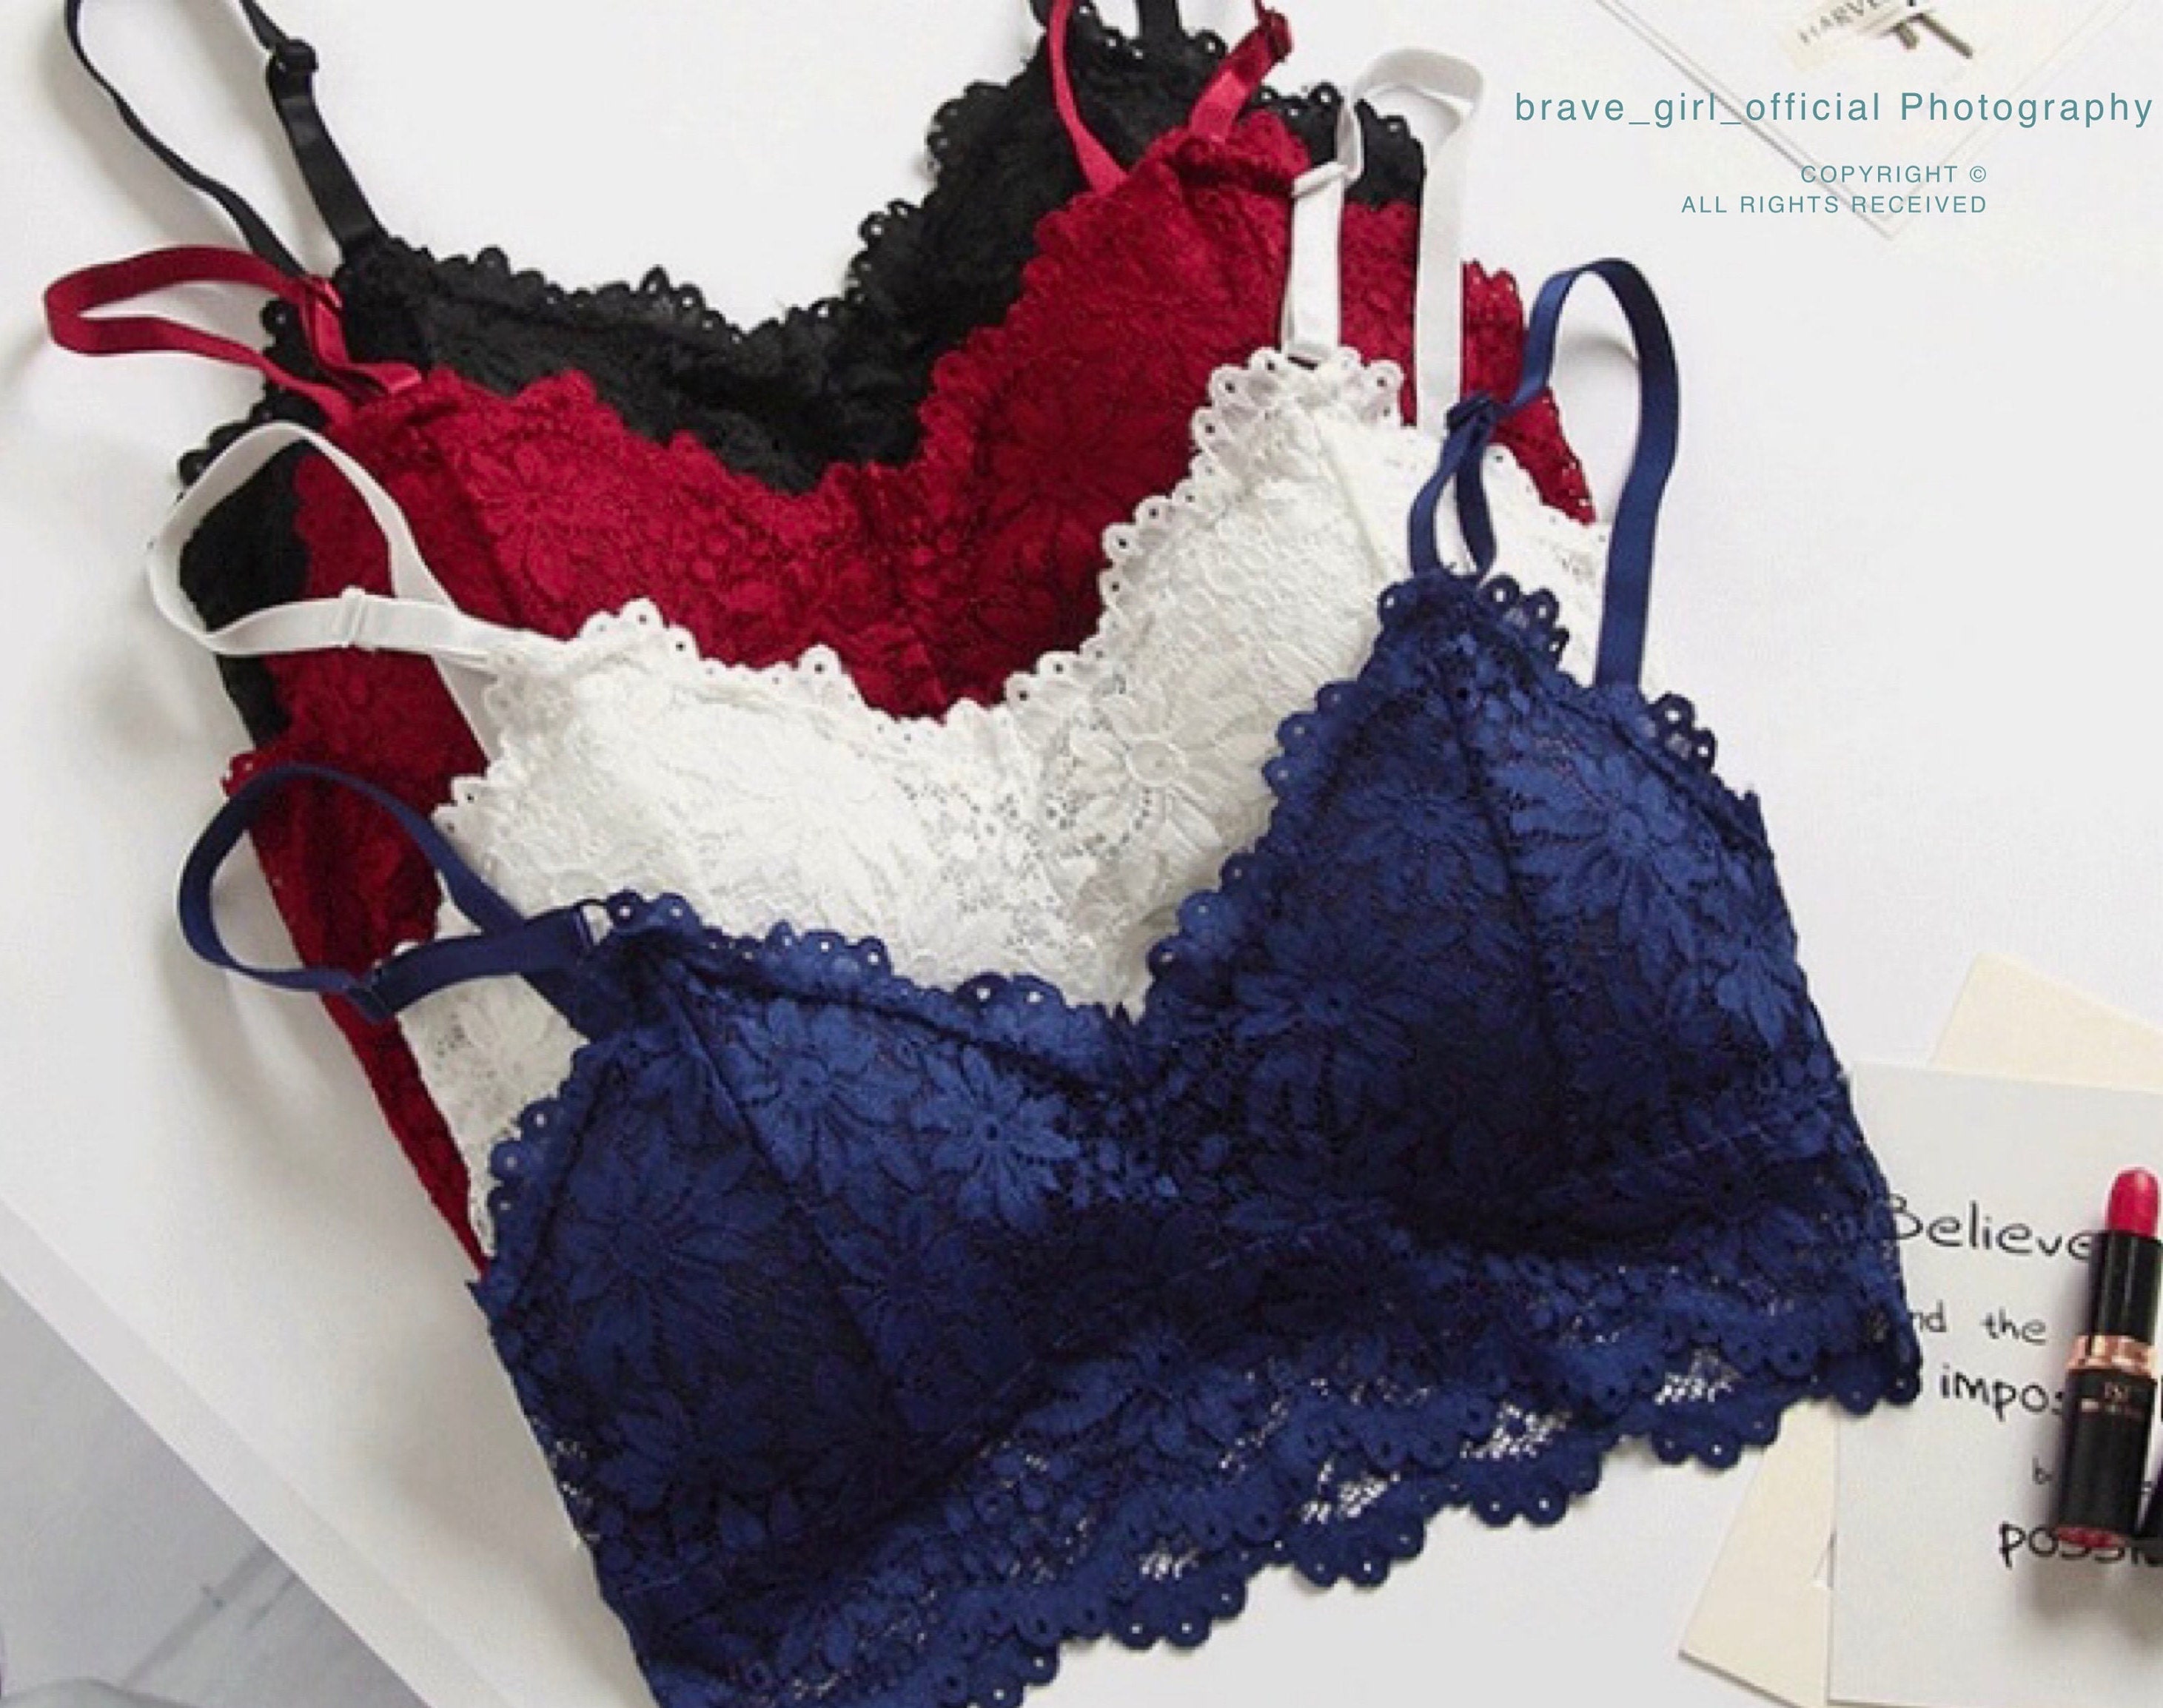 Everyday Bra Lace Triangle Bralette Sheer Scalloped Lingerie Top